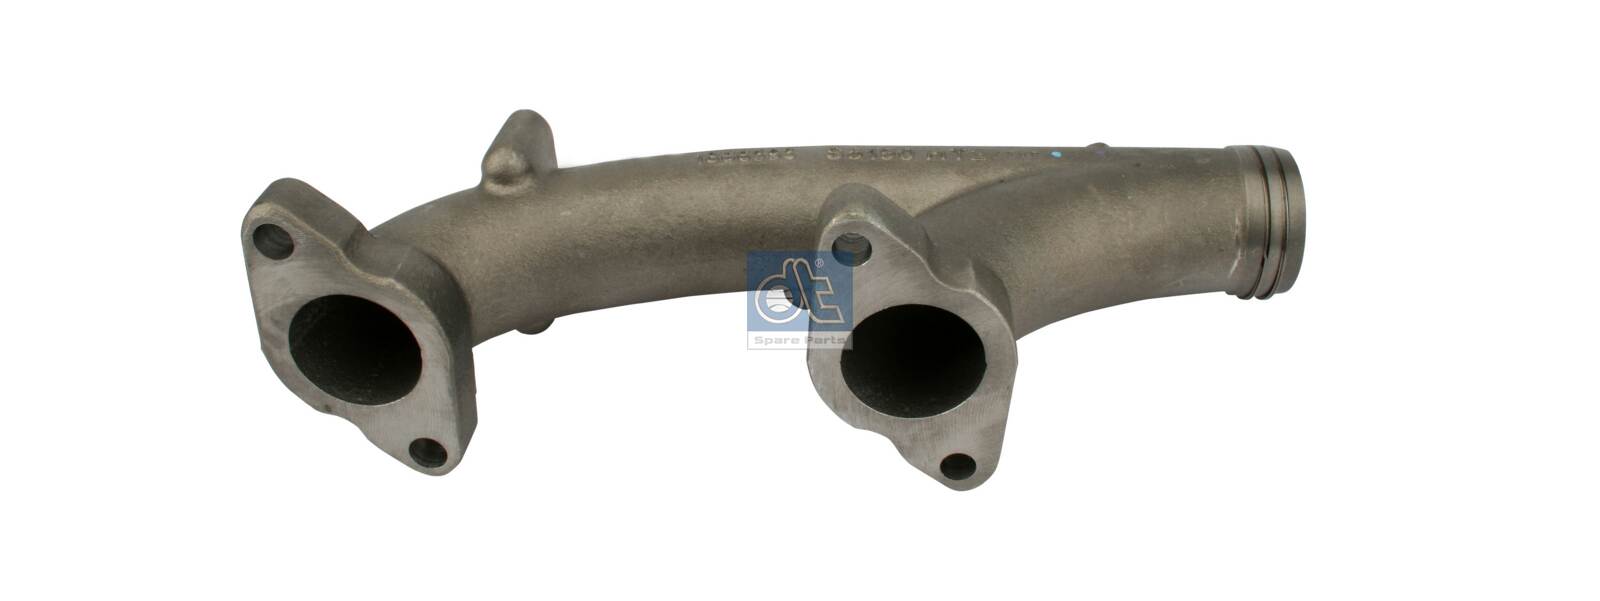 1.10951, Manifold, exhaust system, DT Spare Parts, 1729307, 1863895, 1866393, 1945331, 043.264, 81321